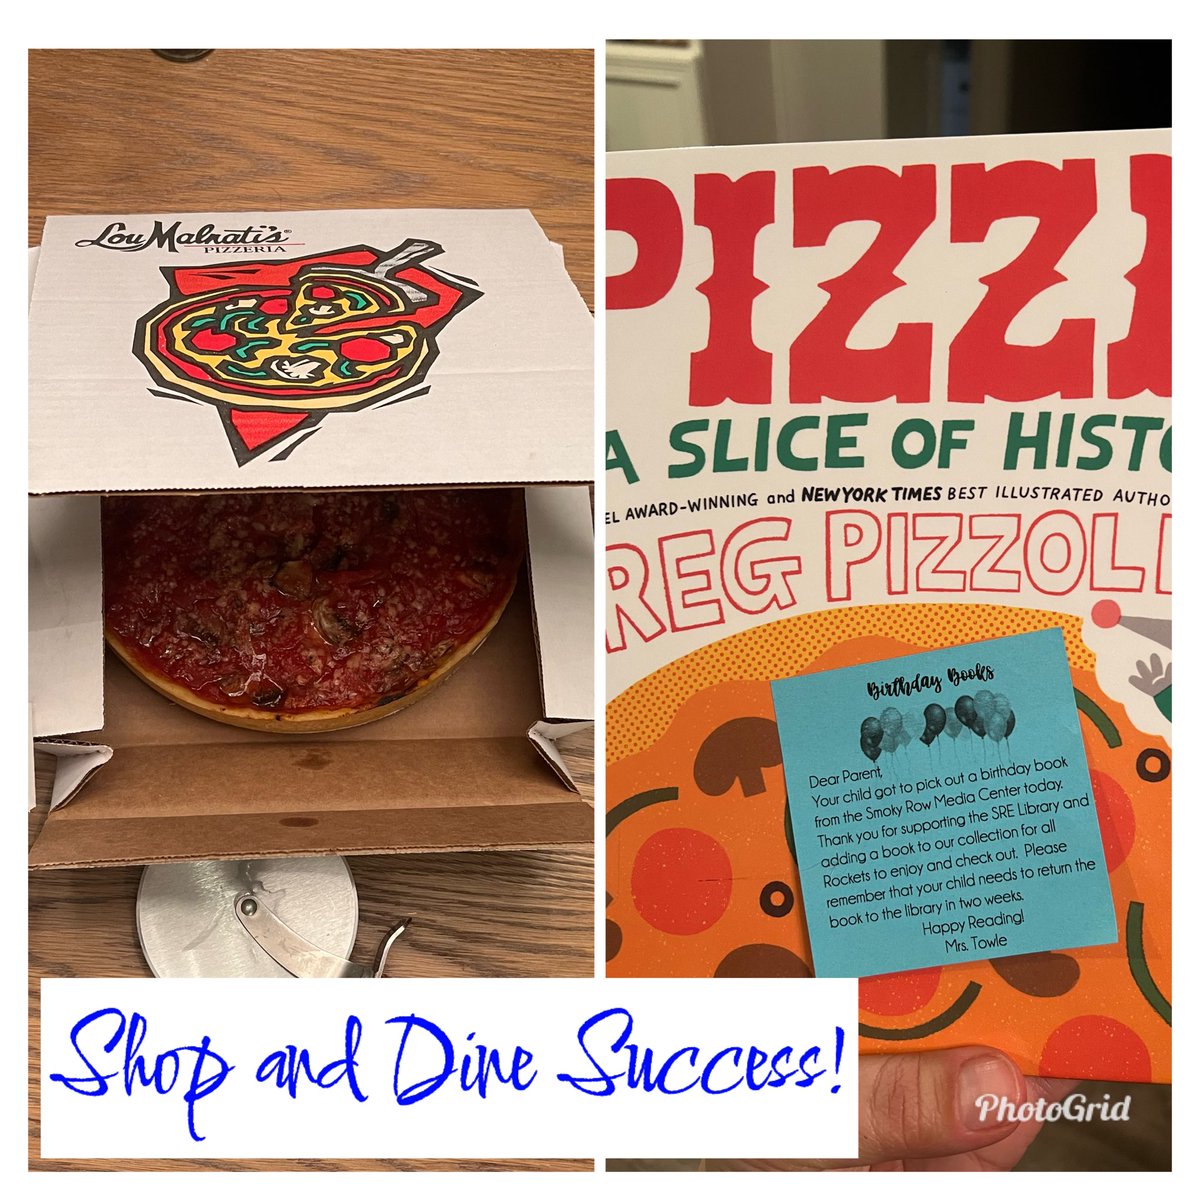 Pizza and Birthday Book about the history of pizza makes for a great shop and dine night at home! 🚀🚀🚀